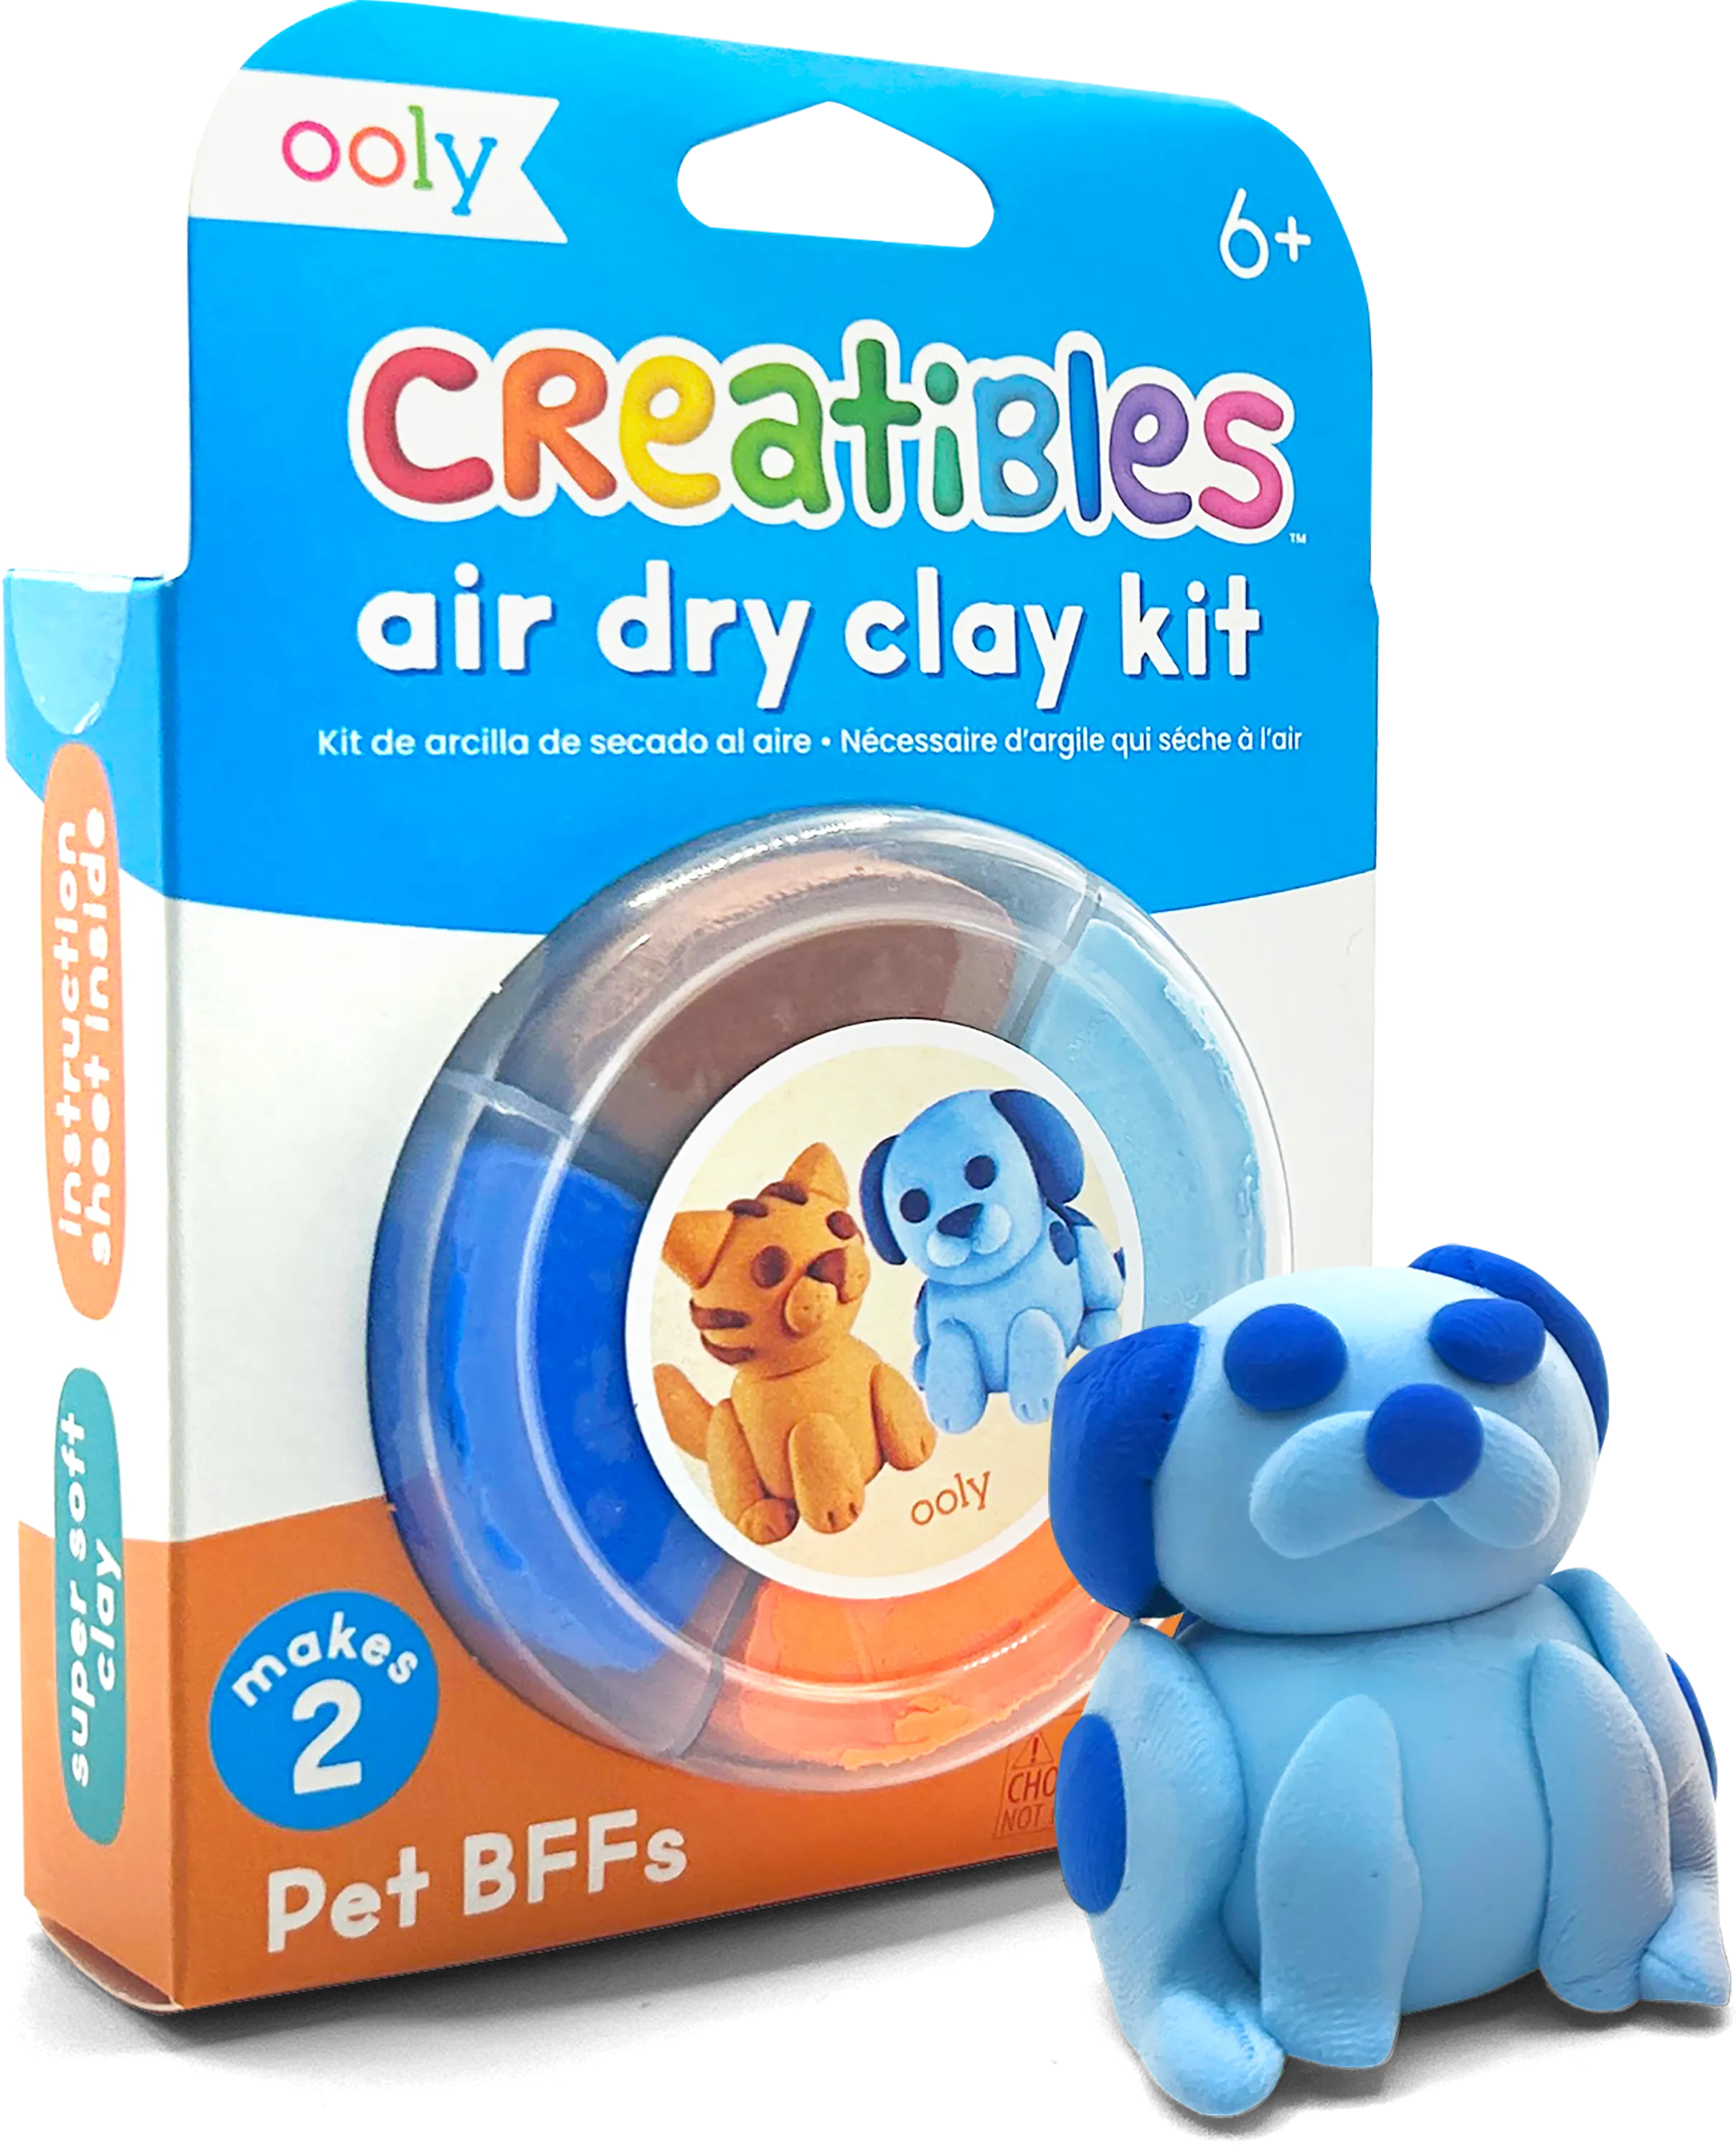 Quarter angle of packaging of OOLY Creatibles Mini Air Dry Clay Kit - Pet BFFs